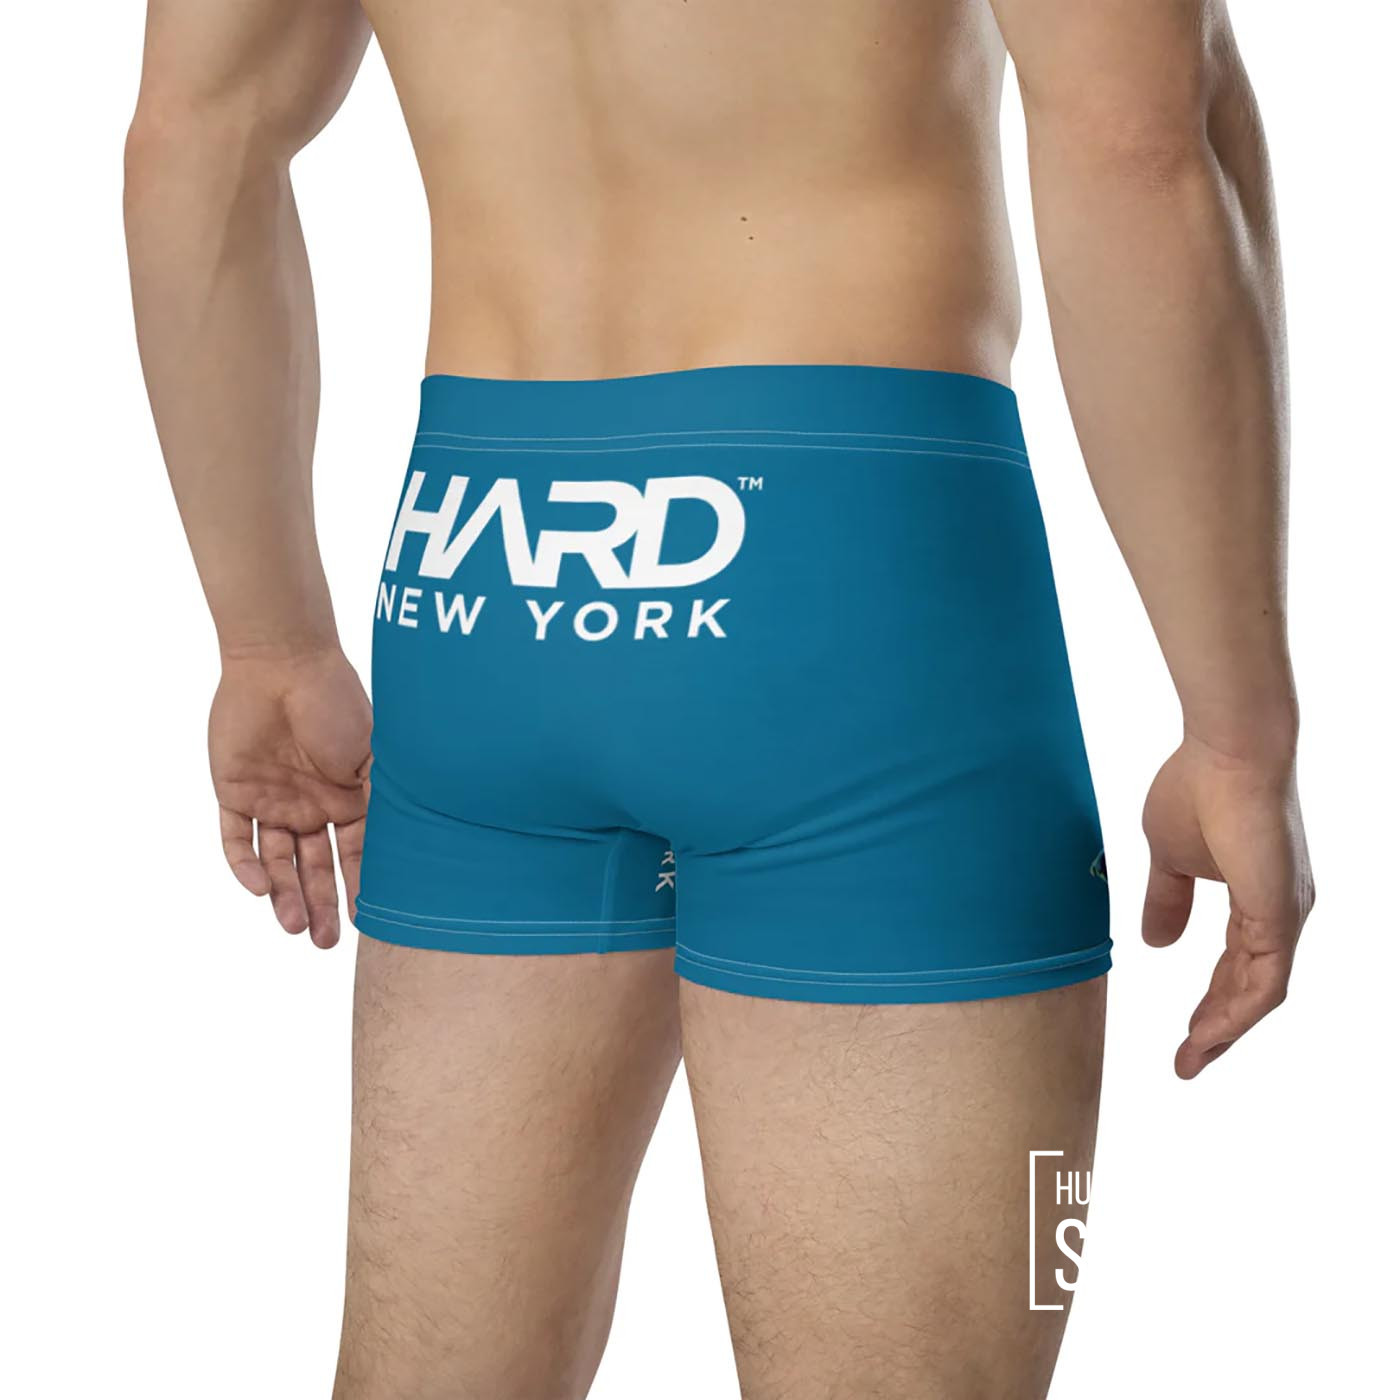 Ditch the Dull Duds: Unleashing Your Inner Superhero with the Best Men's Underwear – Presented by HARD NEW YORK